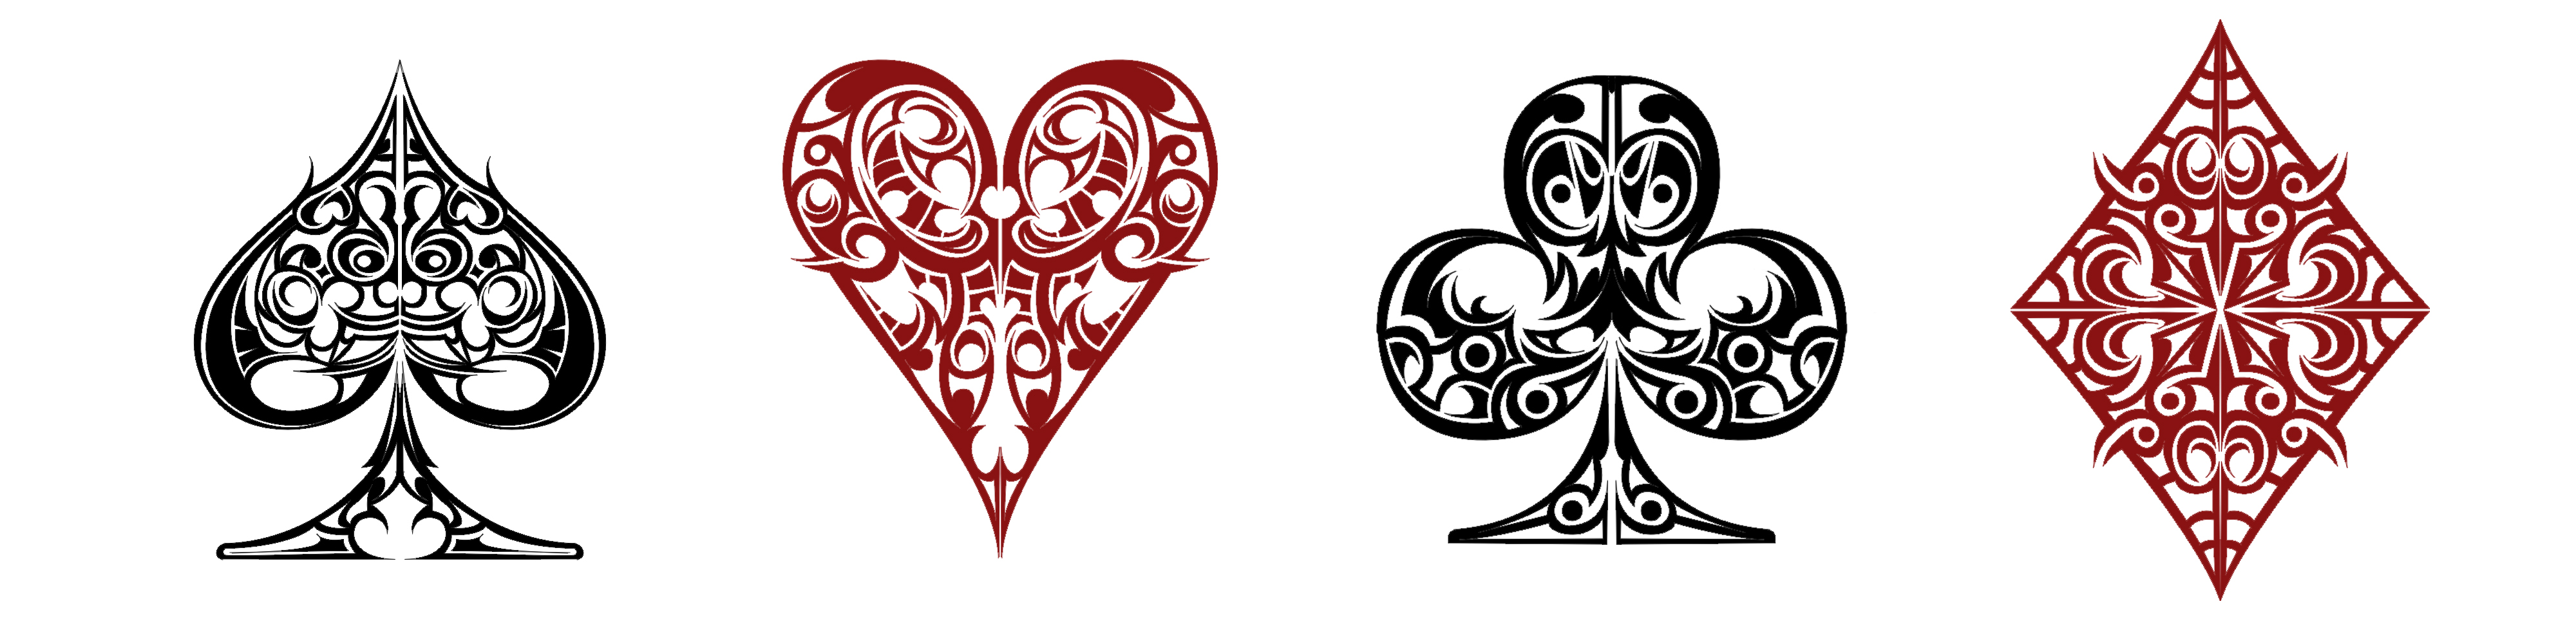 GamblingInspired Tattoo Designs and Their Meaning DesignBump